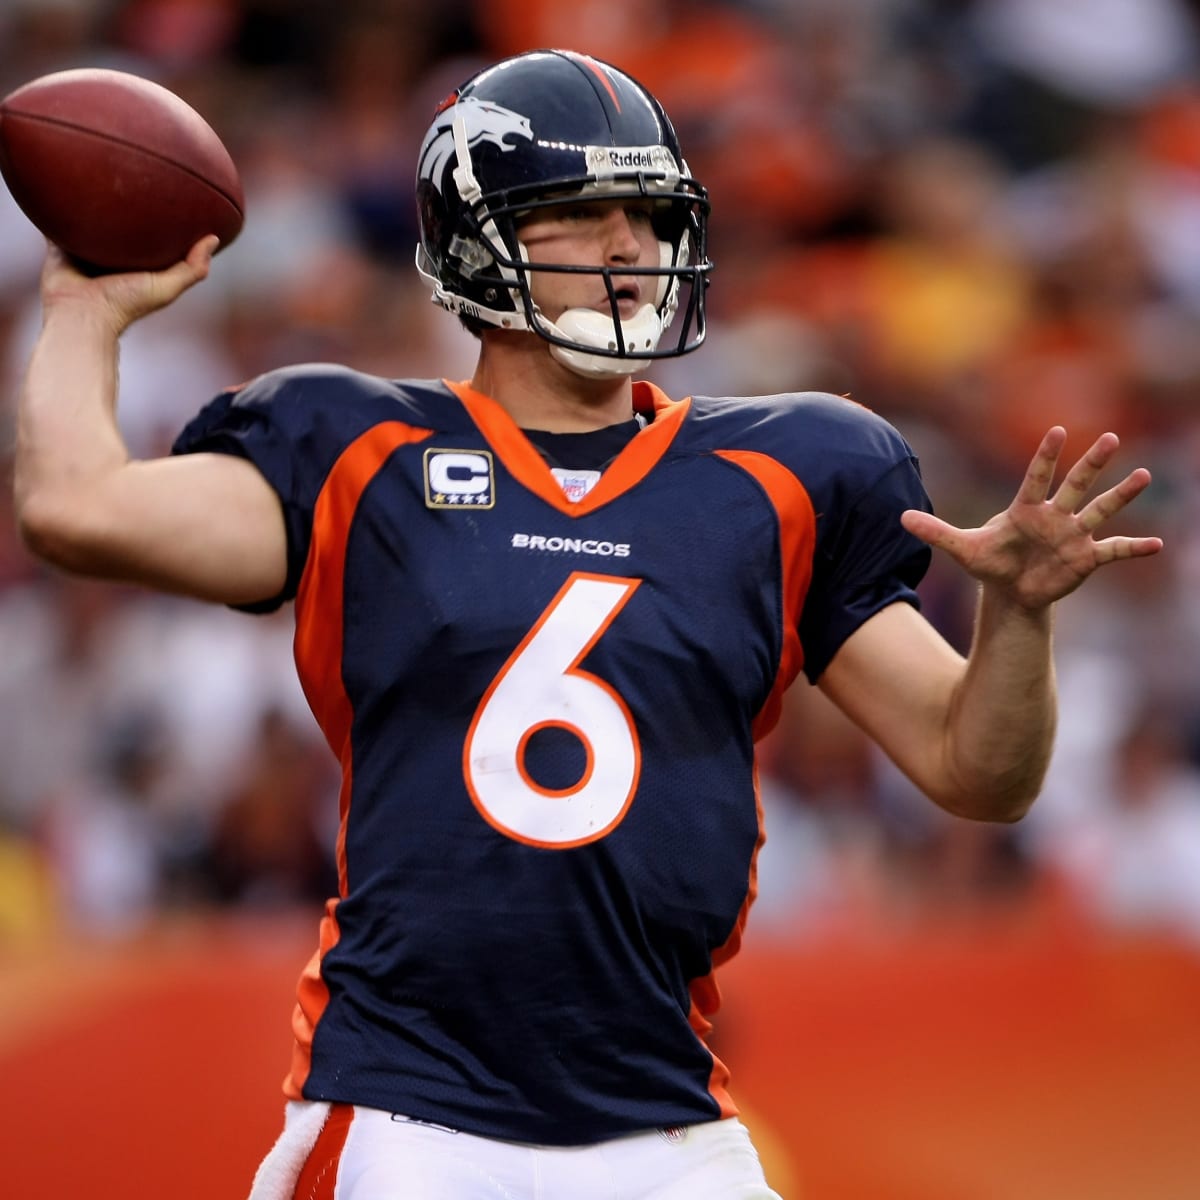 Jay Cutler's Denver Broncos Tenure Provides a Cautionary Tale in